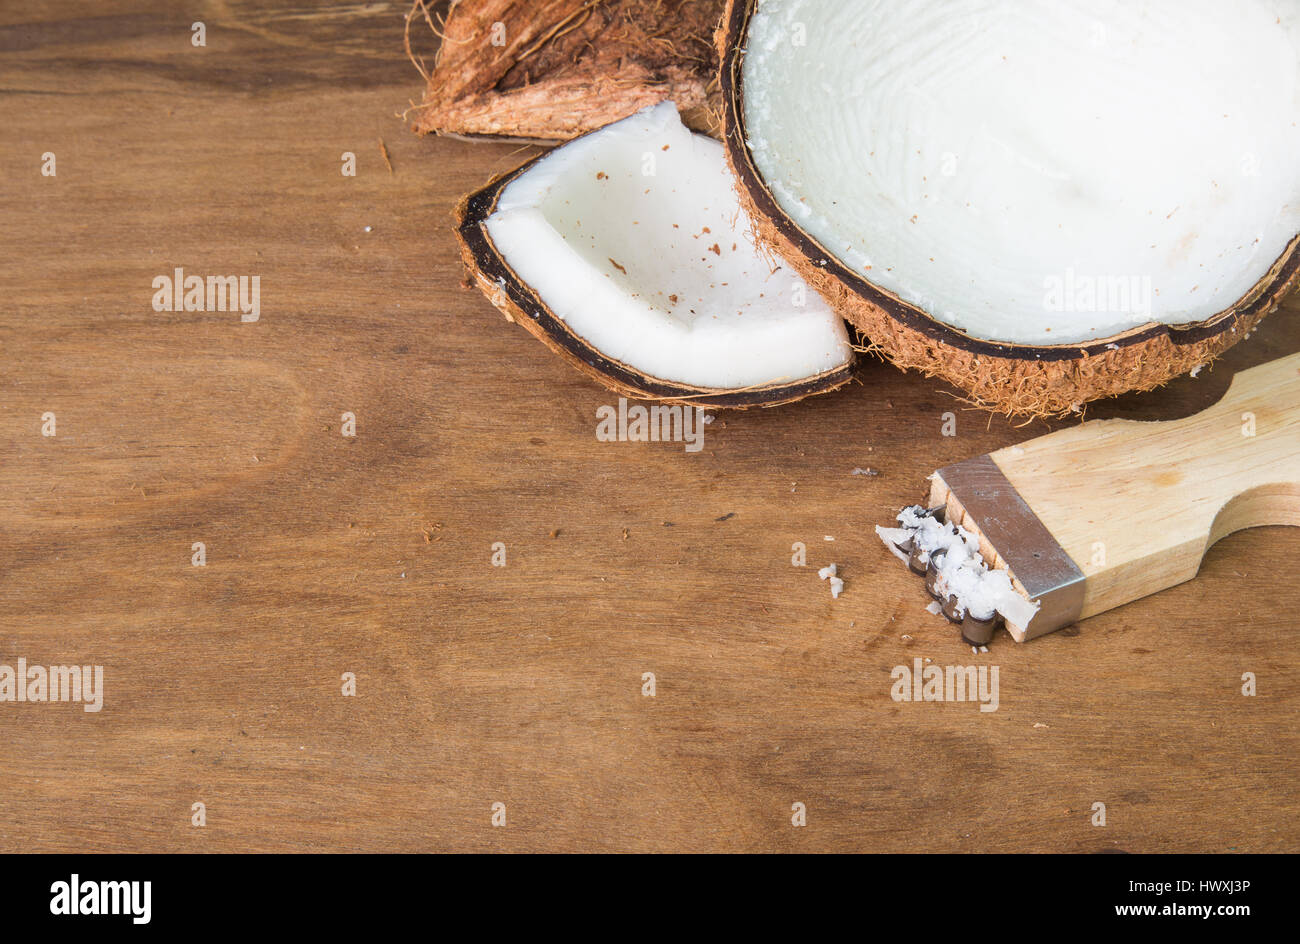 https://c8.alamy.com/comp/HWXJ3P/coconut-and-coconut-grater-on-wooden-background-HWXJ3P.jpg